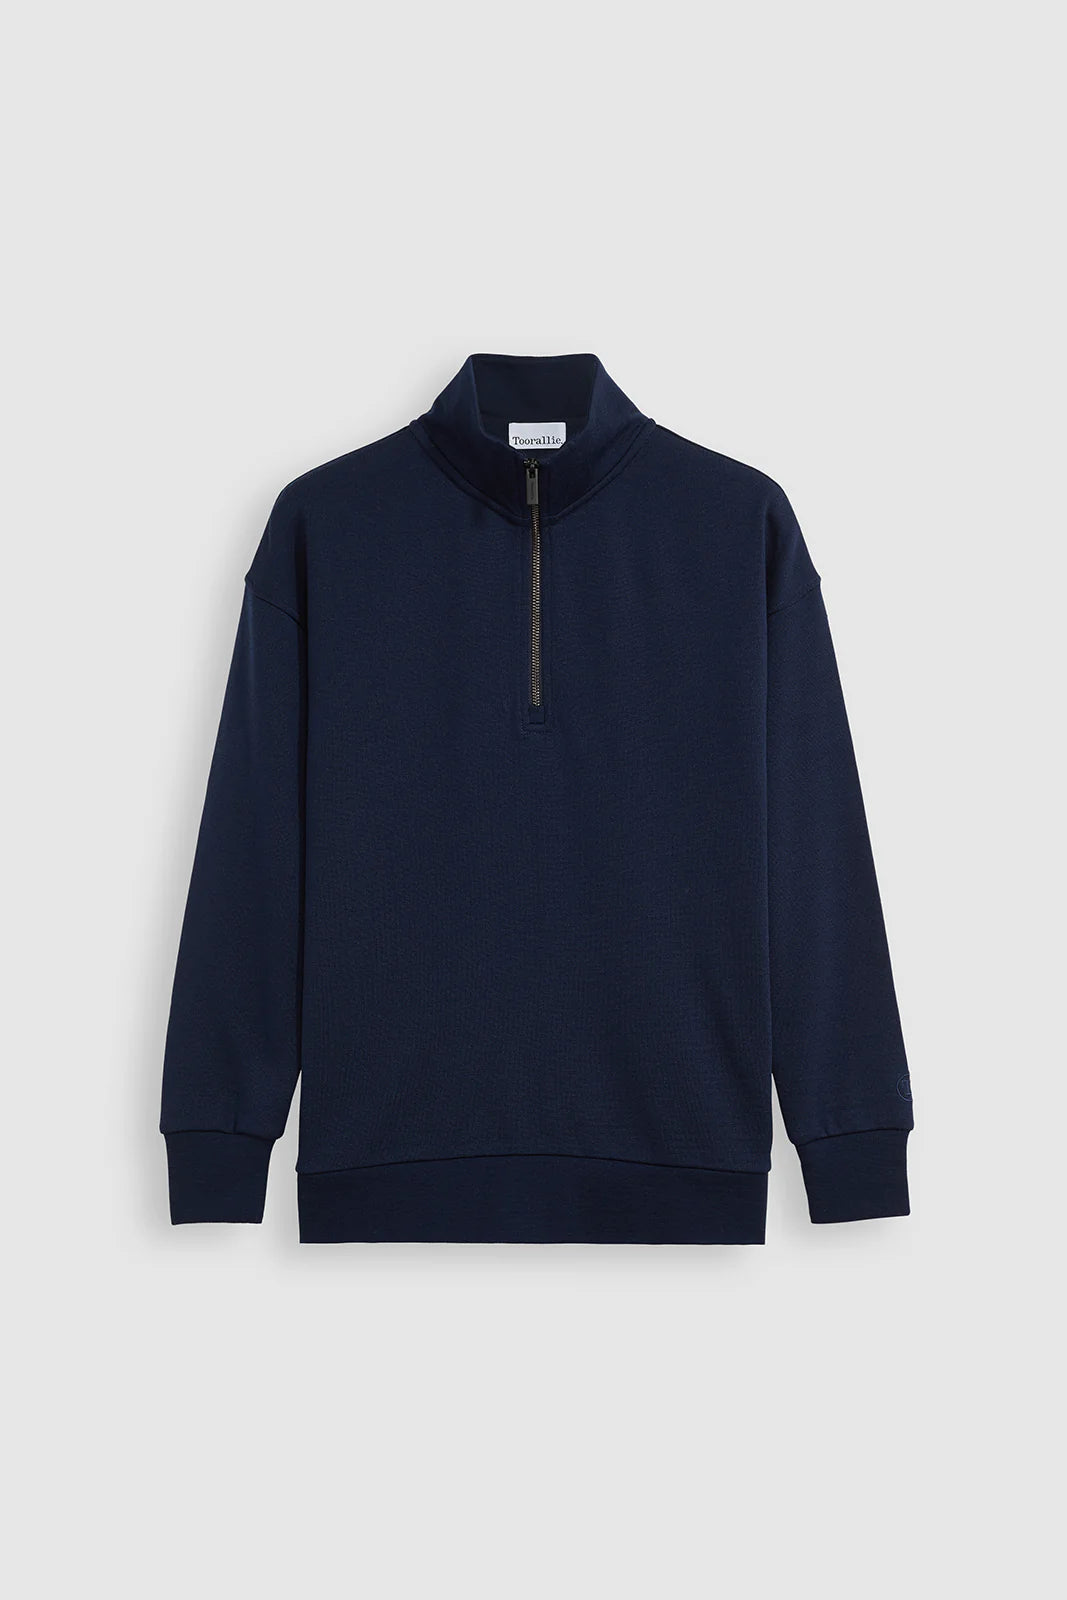 Upgrade your look with our navy Merino wool zip sweater. Unmatched comfort meets refined style.